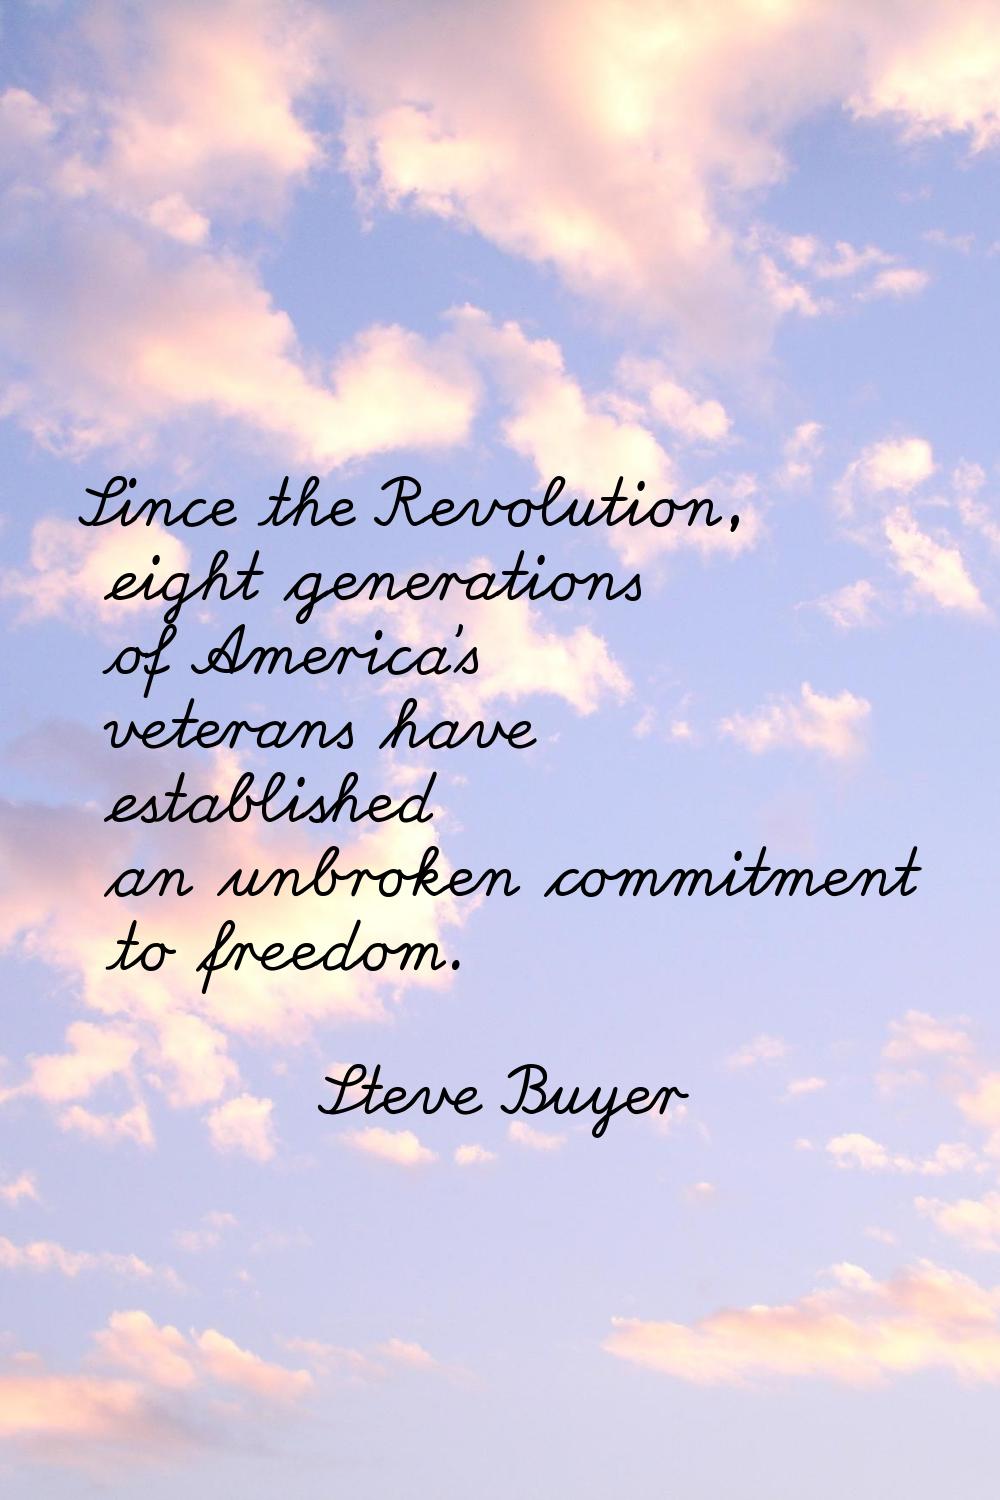 Since the Revolution, eight generations of America's veterans have established an unbroken commitme